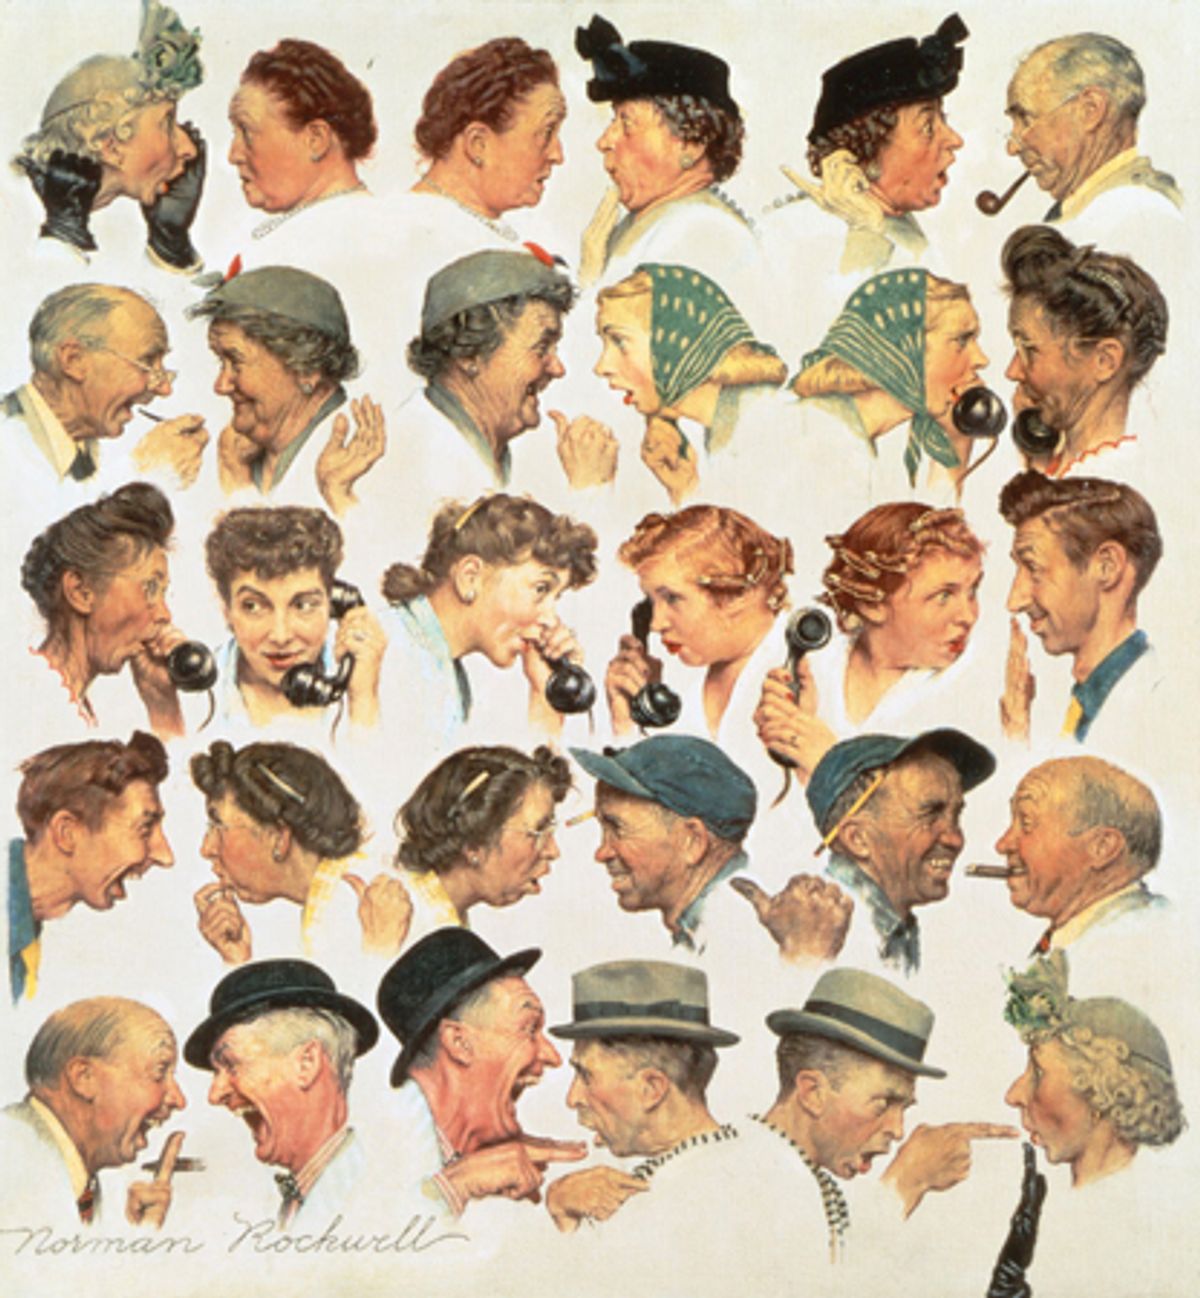 Norman Rockwell's The Gossips.